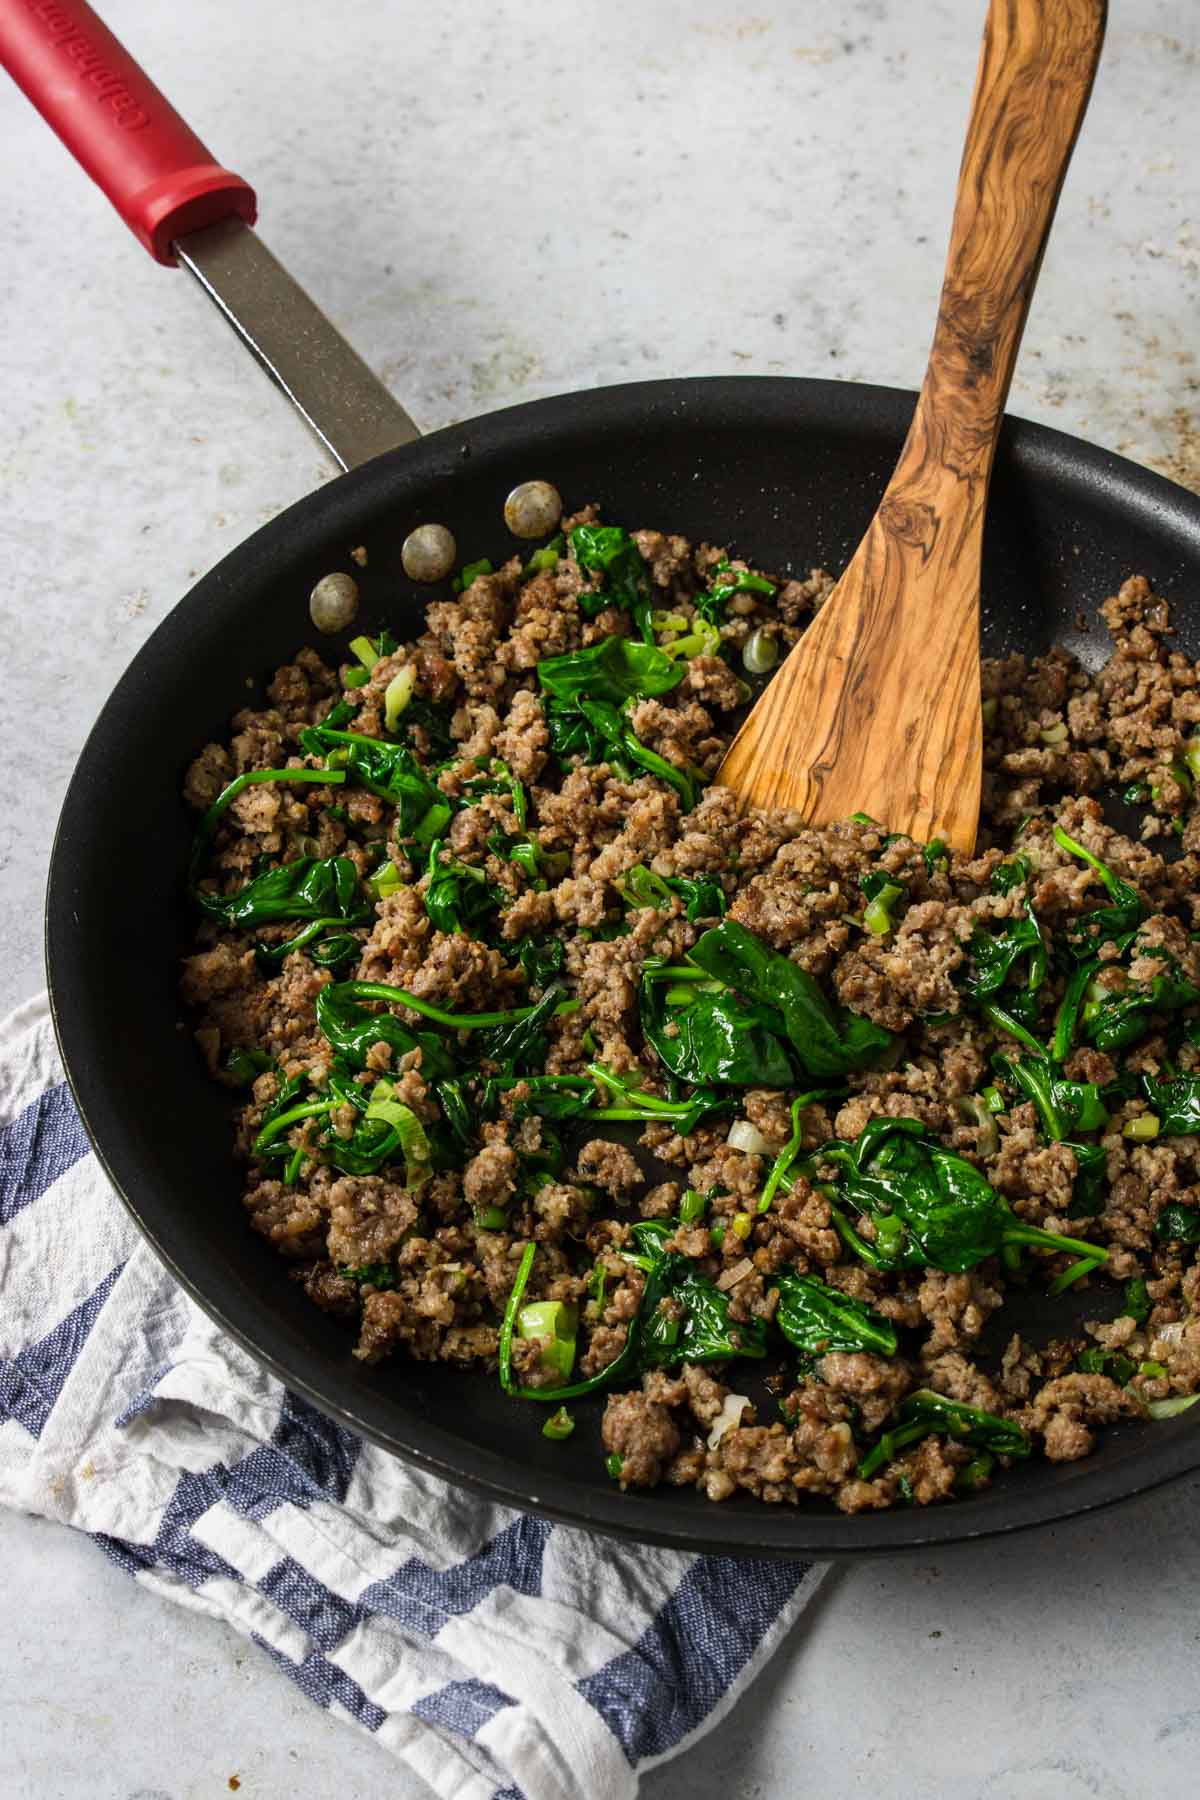 crumbled breakfast sausage with spinach and basil in a skillet